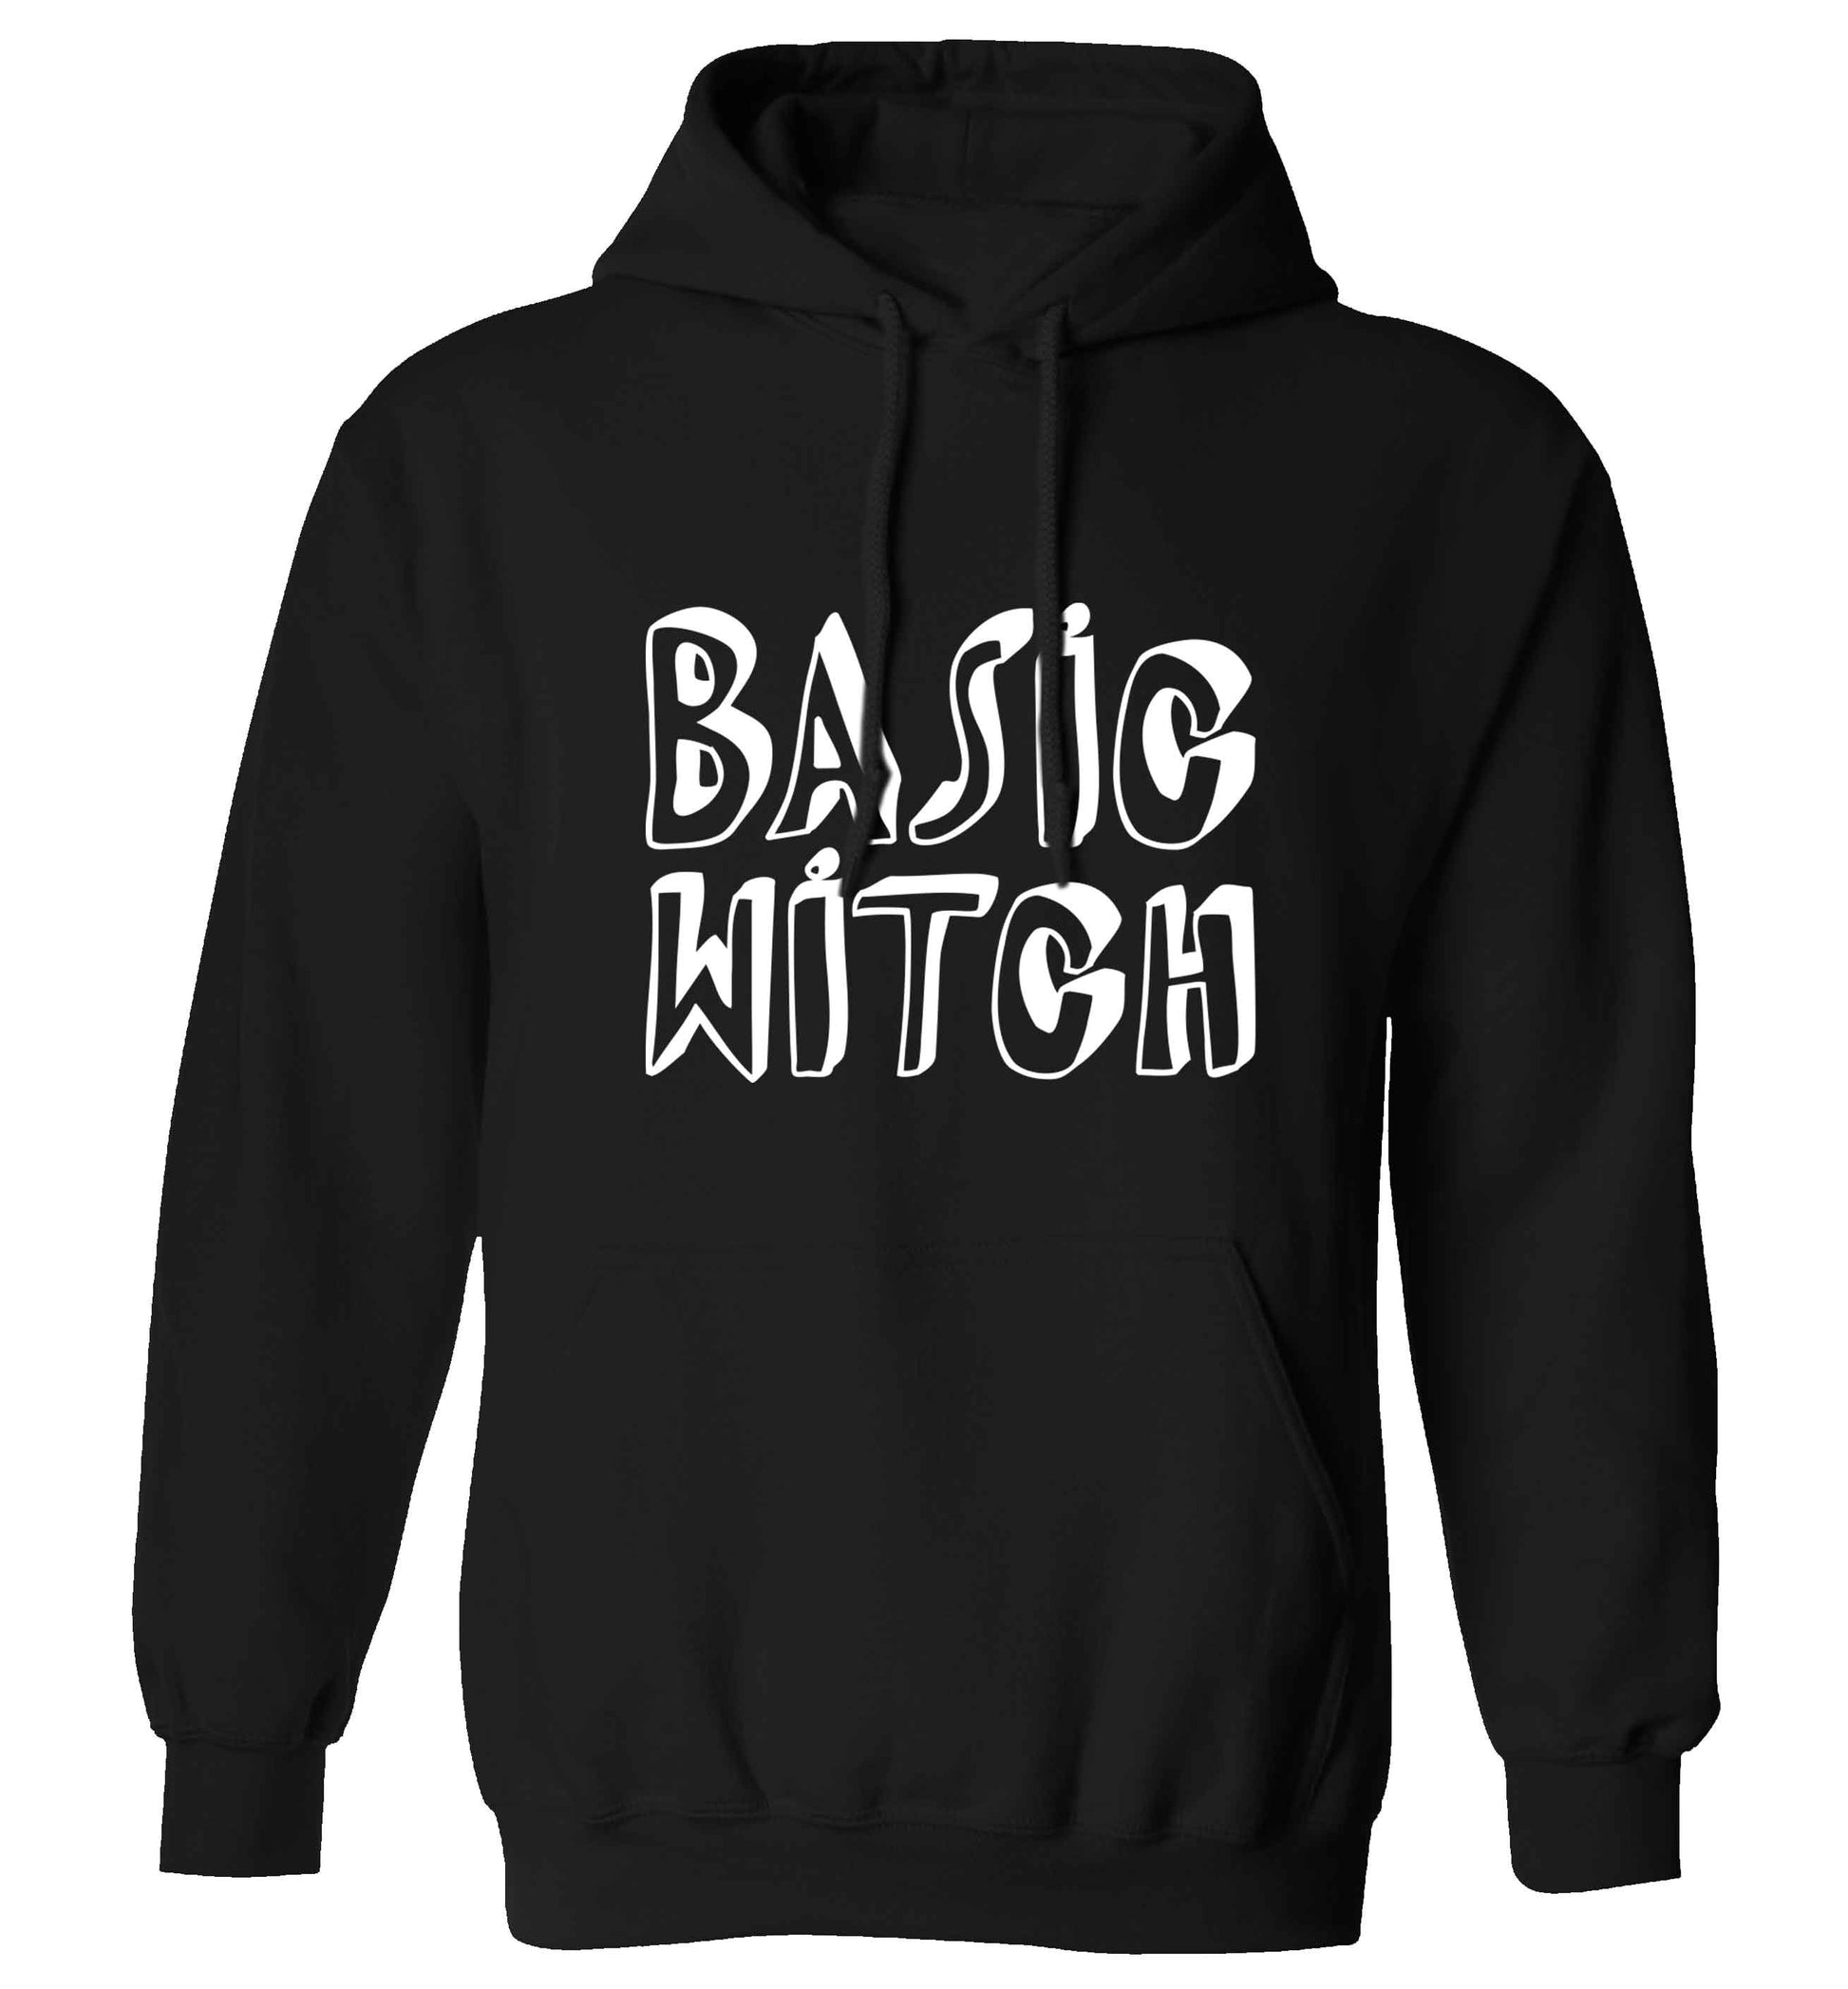 Basic witch adults unisex black hoodie 2XL